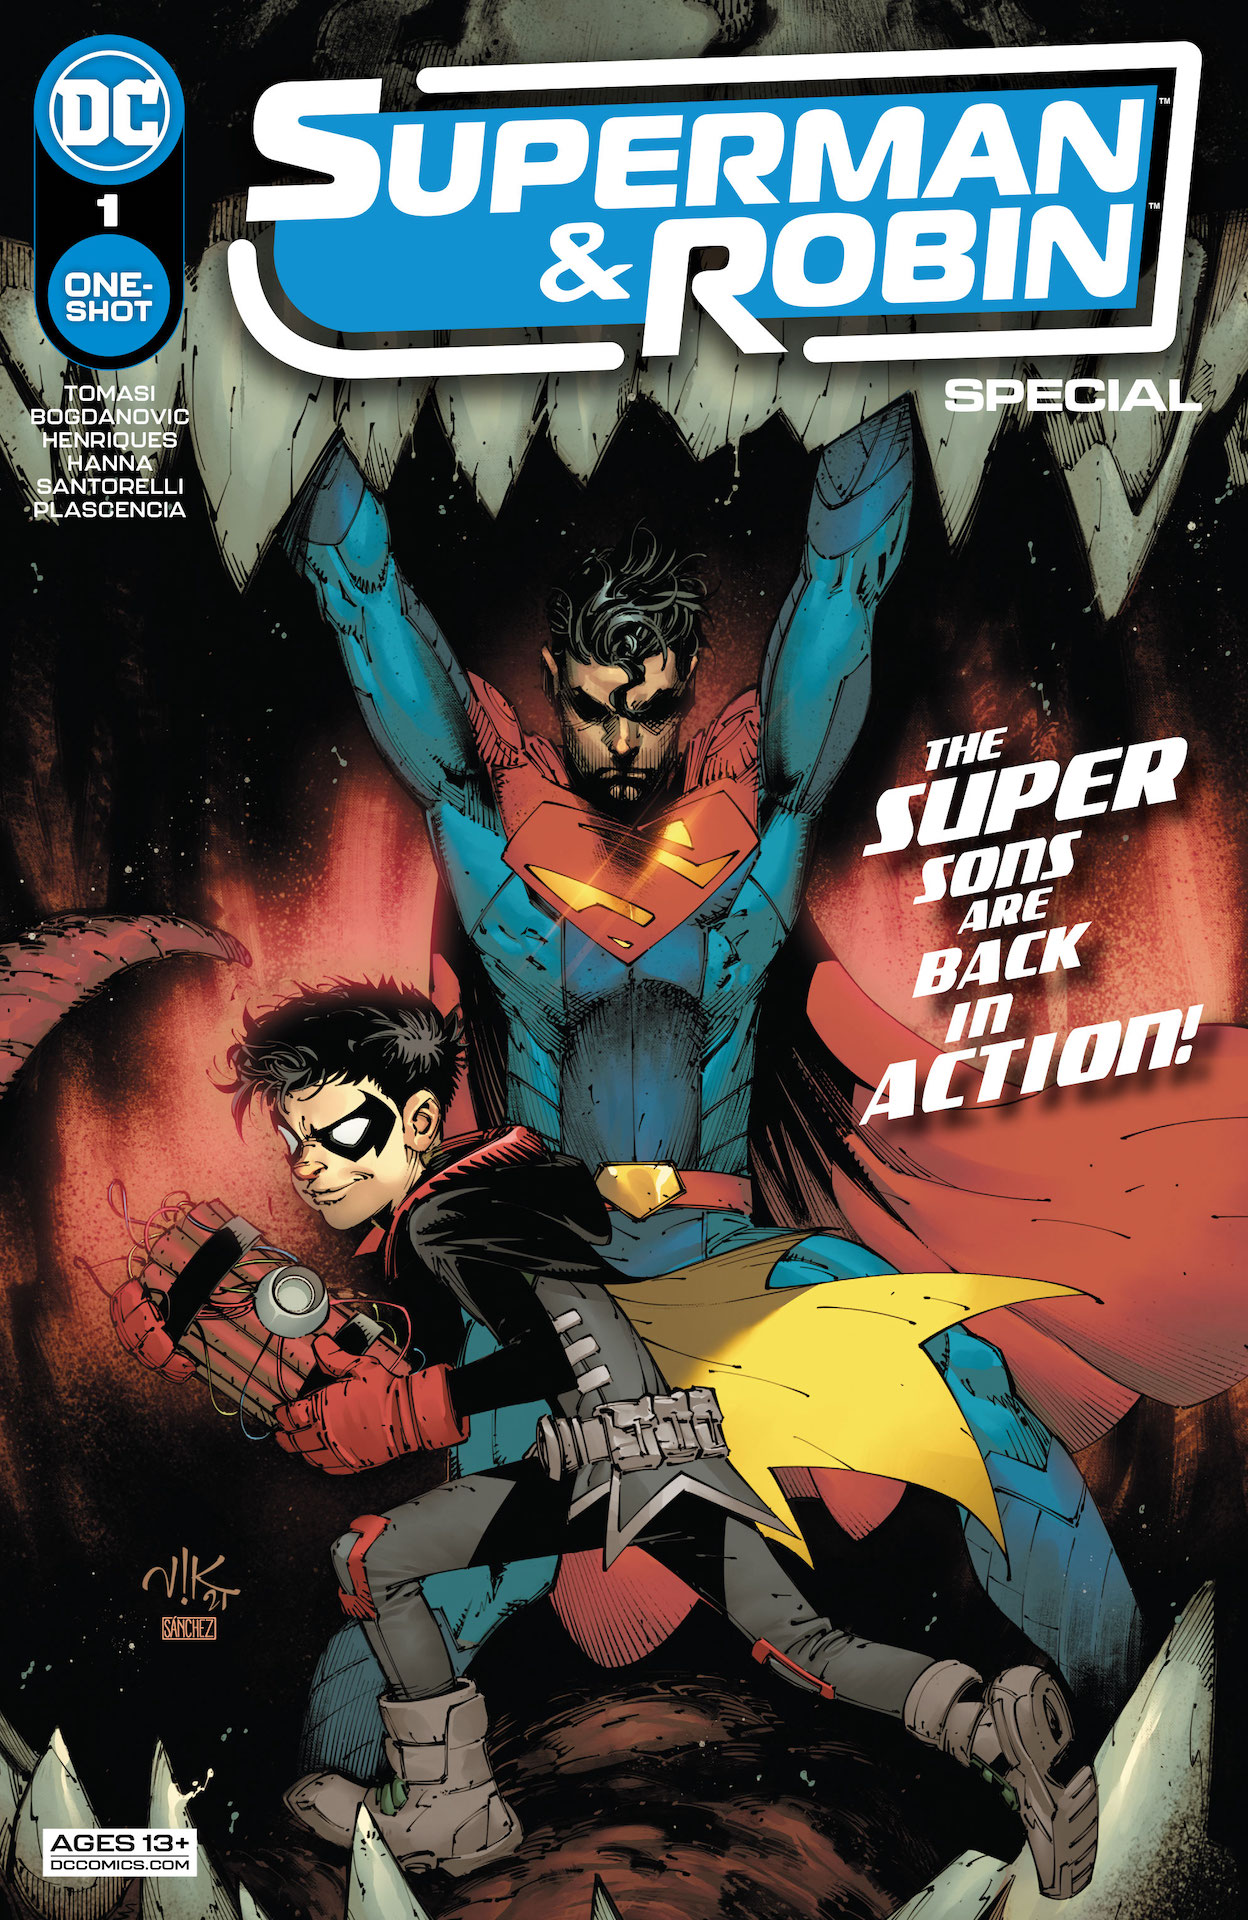 DC Preview: Superman & Robin Special #1